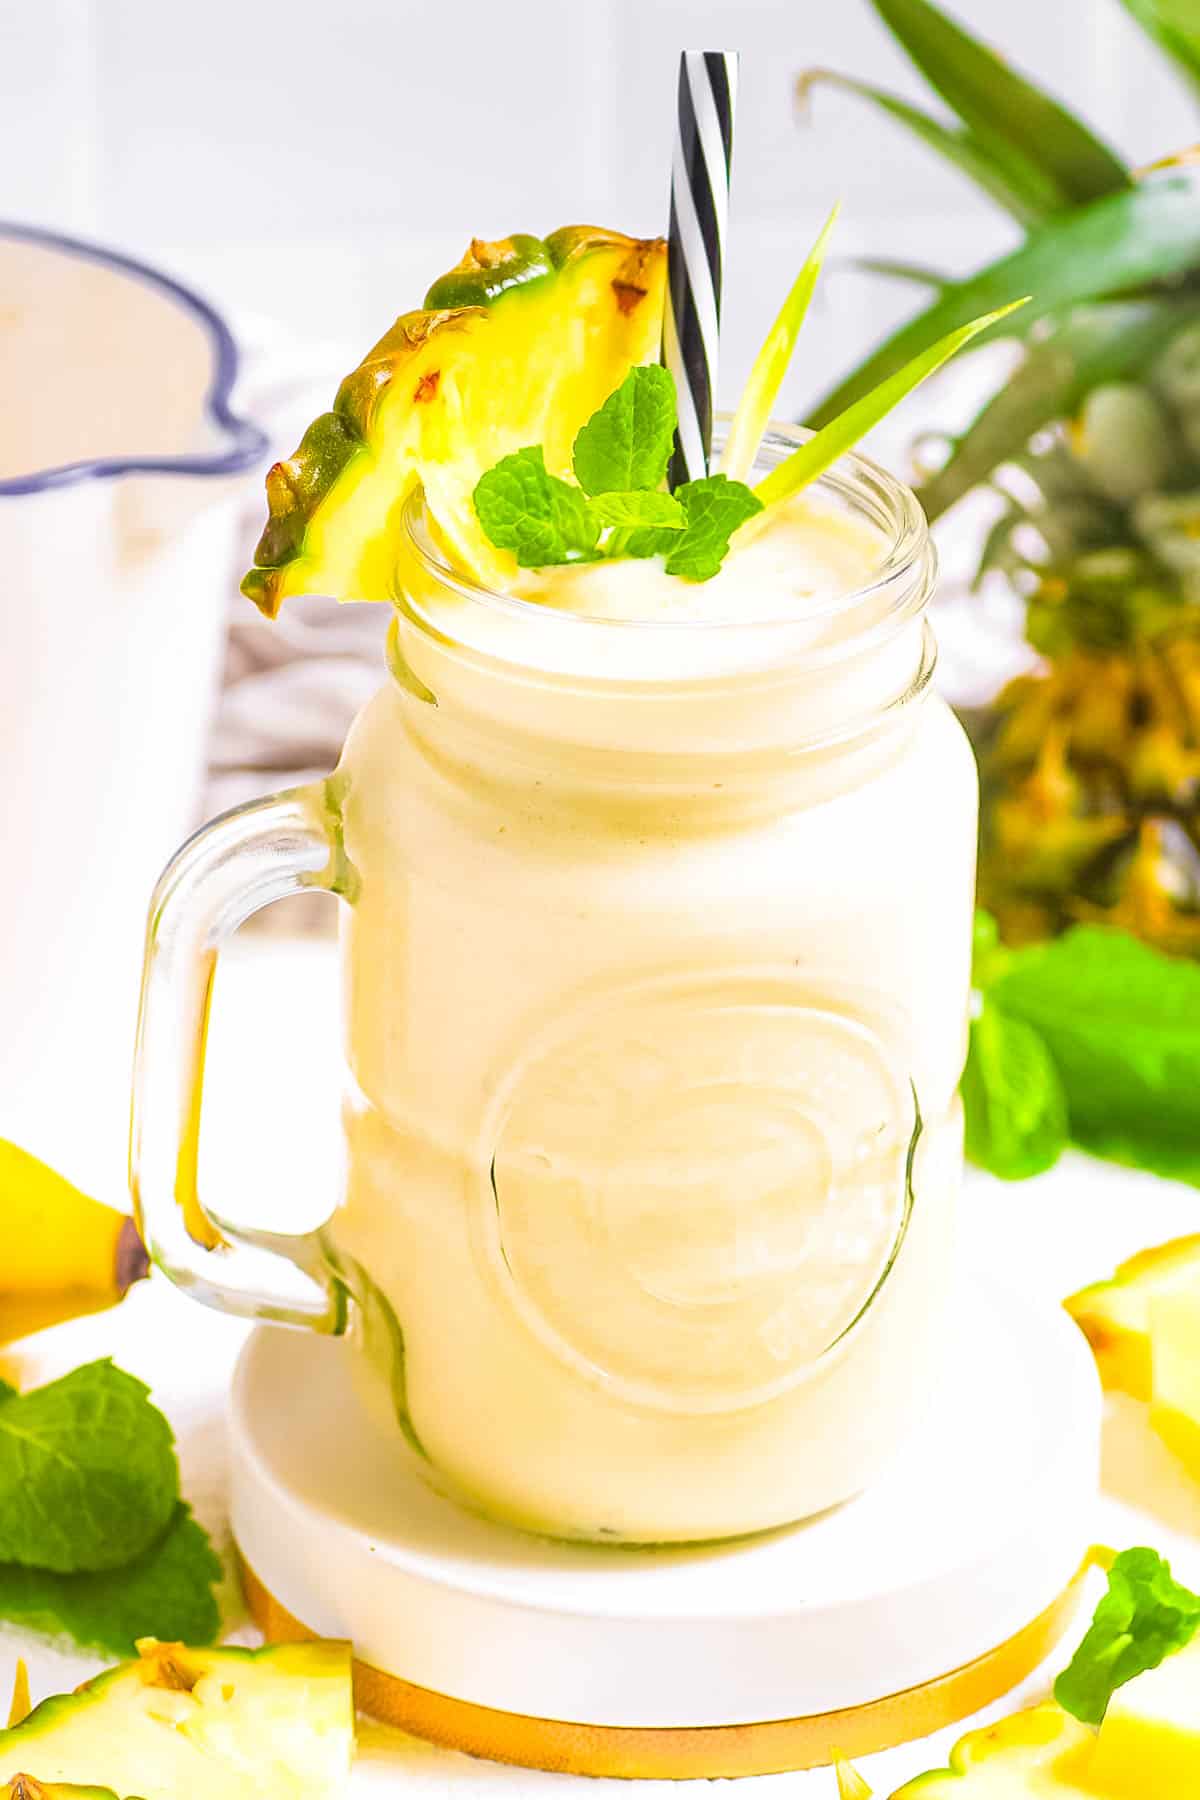 Pineapple and banana smoothie, served in a gl،, garnished with a pineapple wedge and mint leaves.